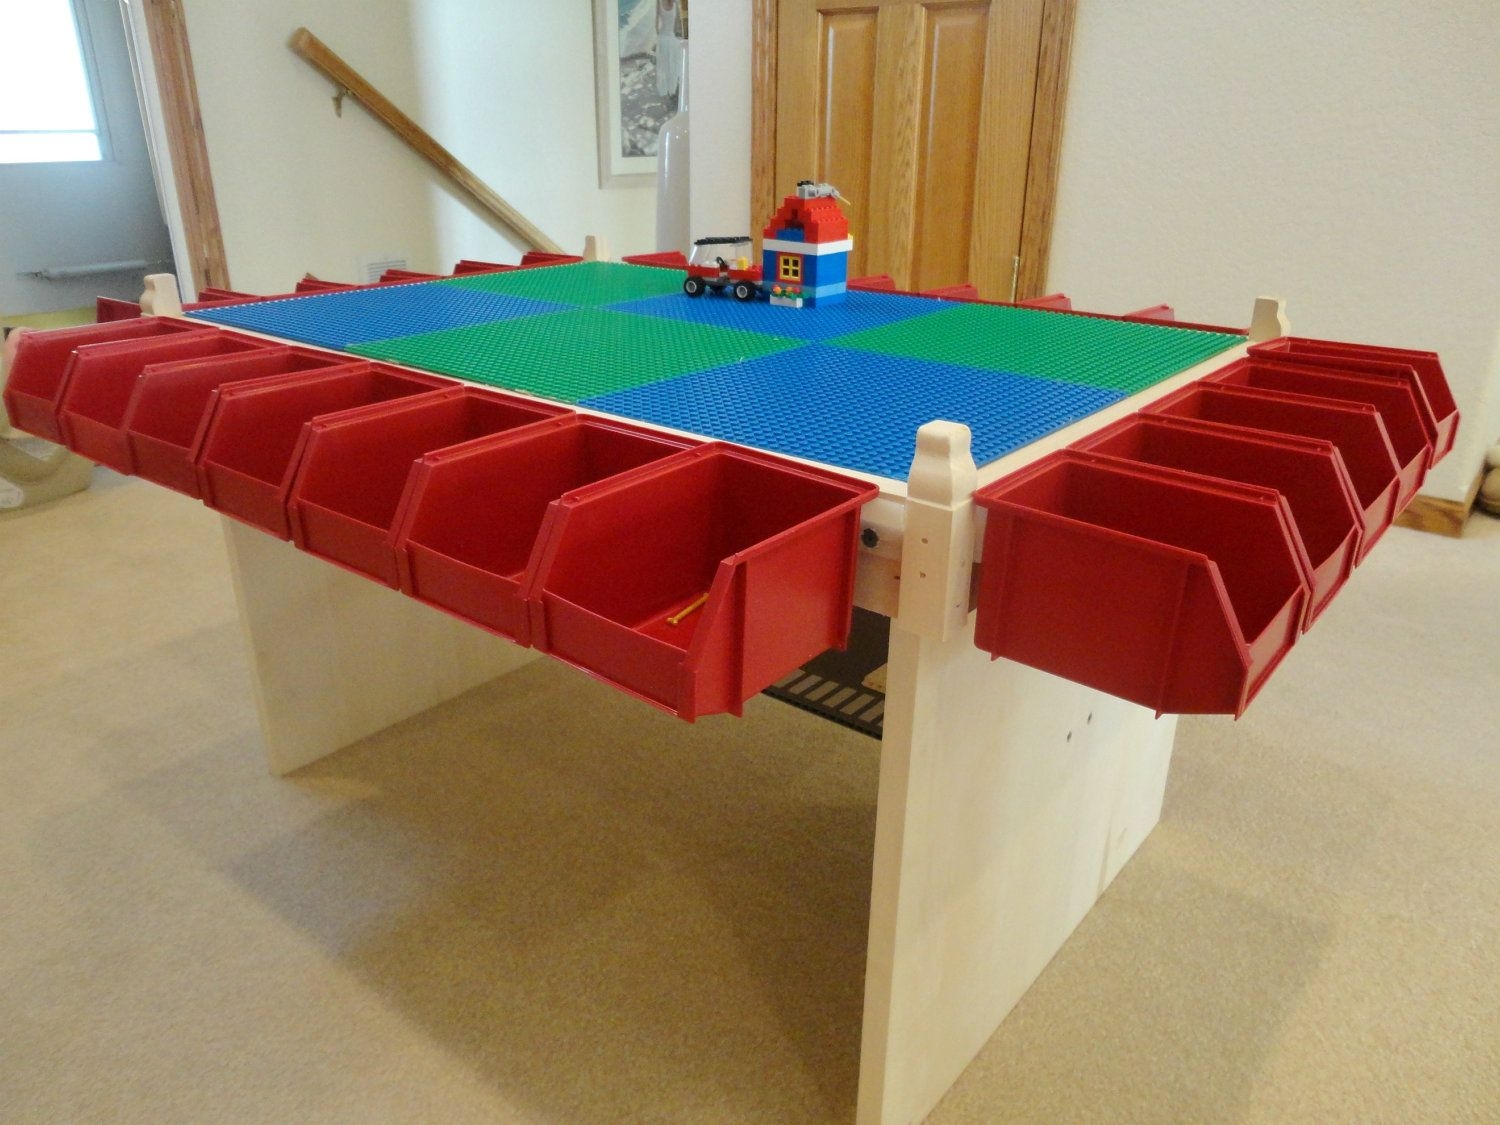 Lego table kids play table lots of